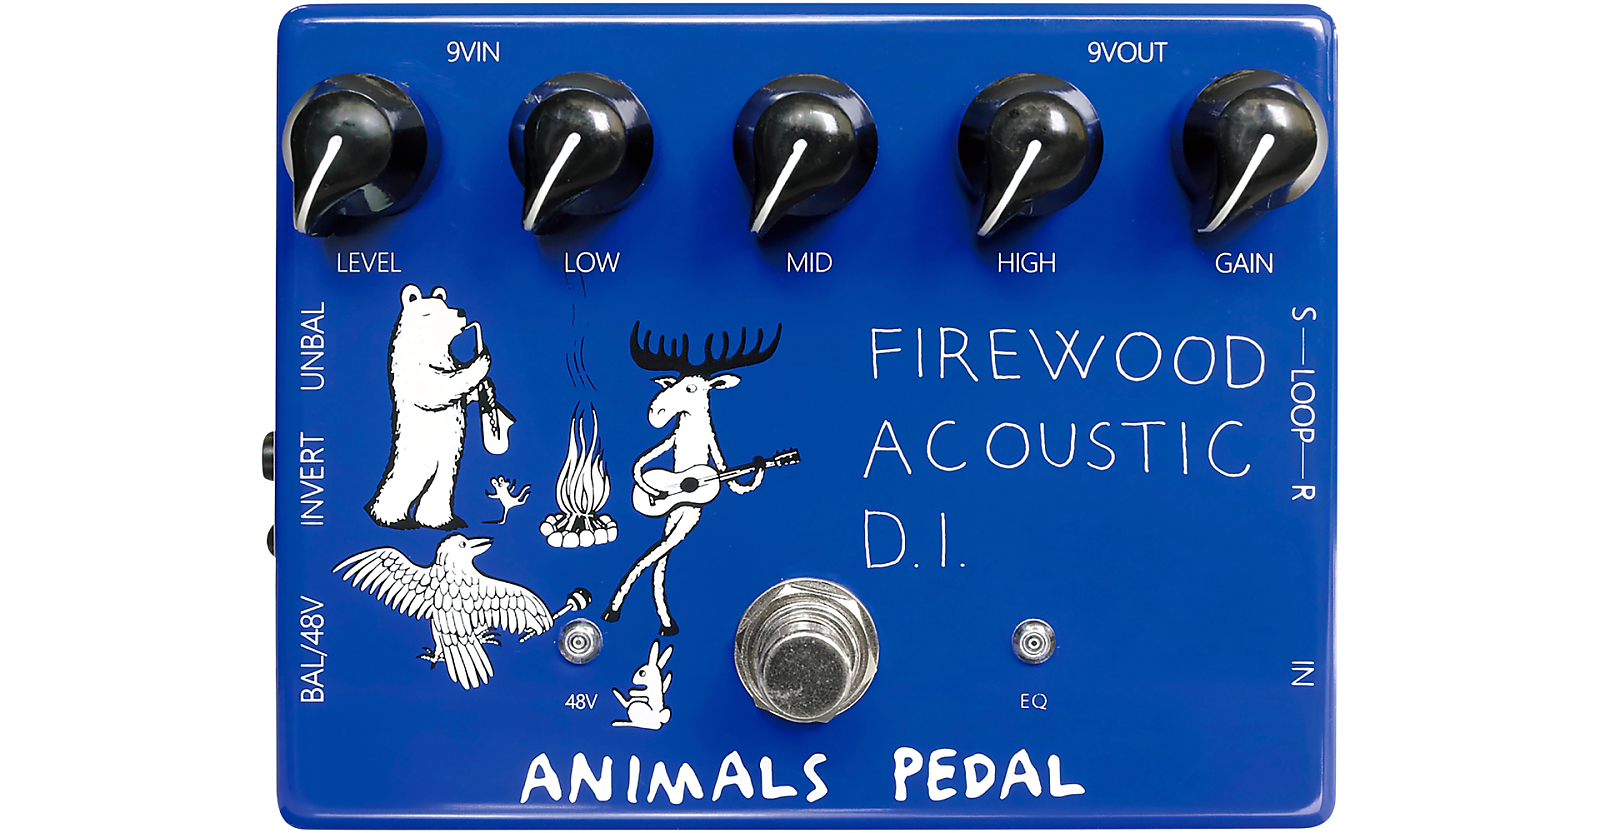 Animals Pedal Firewood Acoustic DI | Reverb